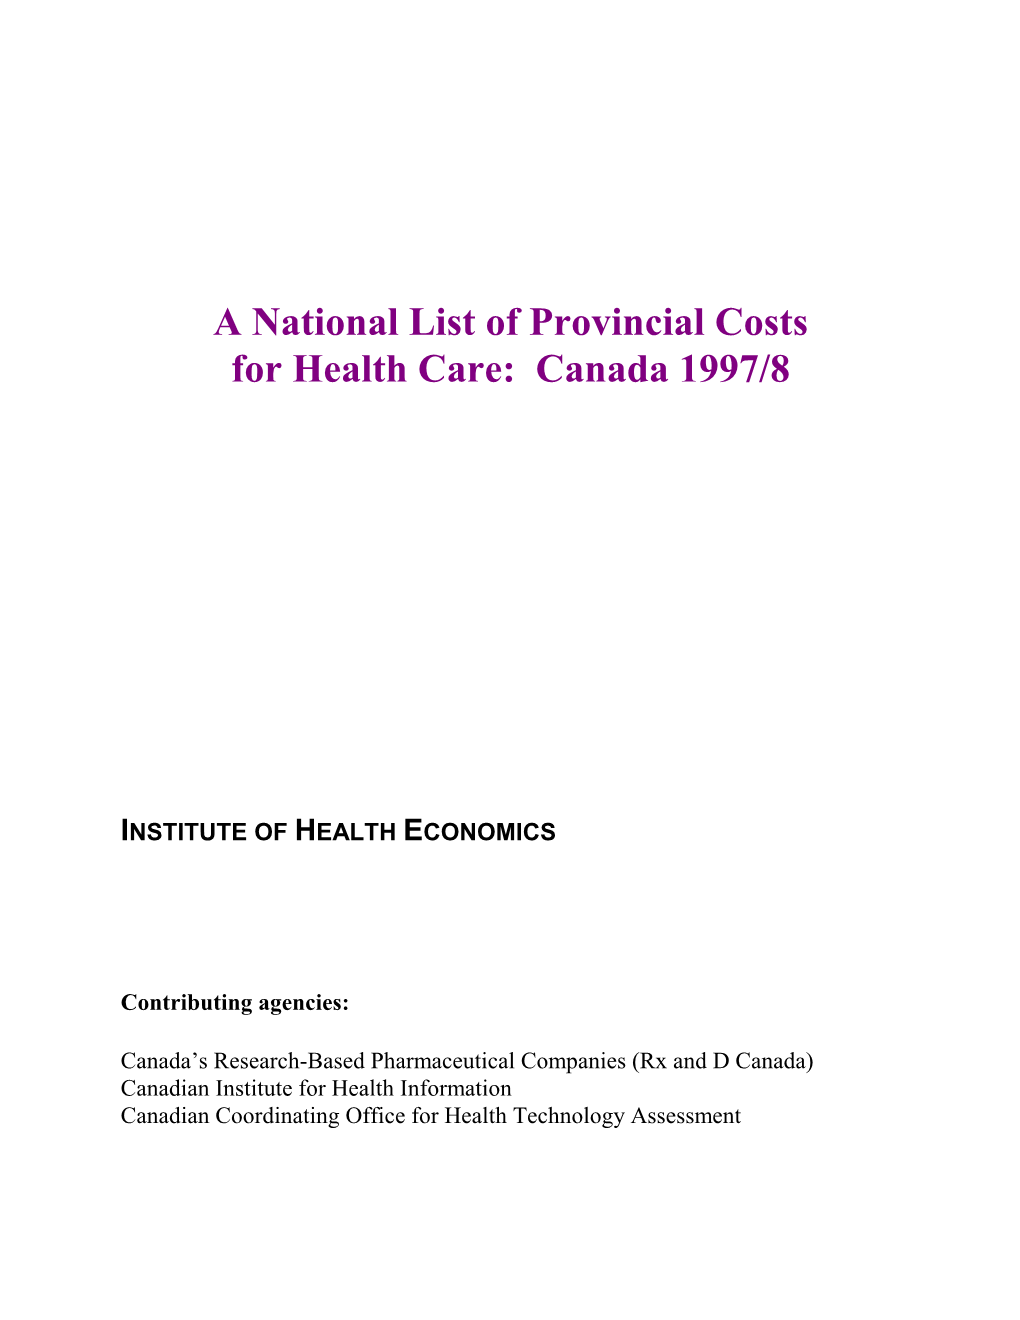 A National List of Provincial Costs for Health Care: Canada 1997/8